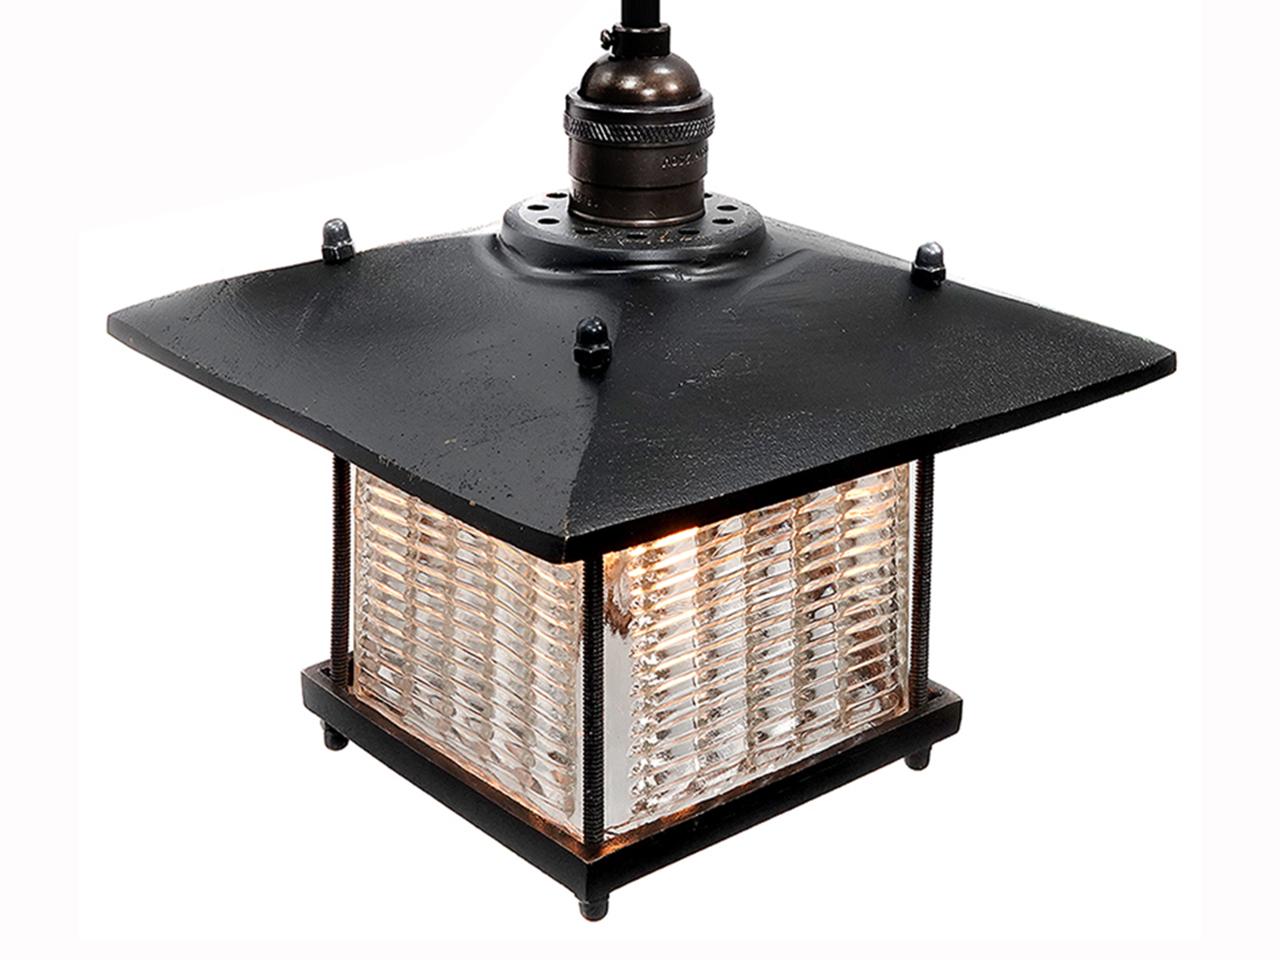 This pendent has a Frank Lloyd Wright feel. The long overhang on the shade has a strong architectural look and goes well with the louvered prismatic glass. The brass is a heavy cast and feels rich. The glass was inspired by early industrial Luxfer